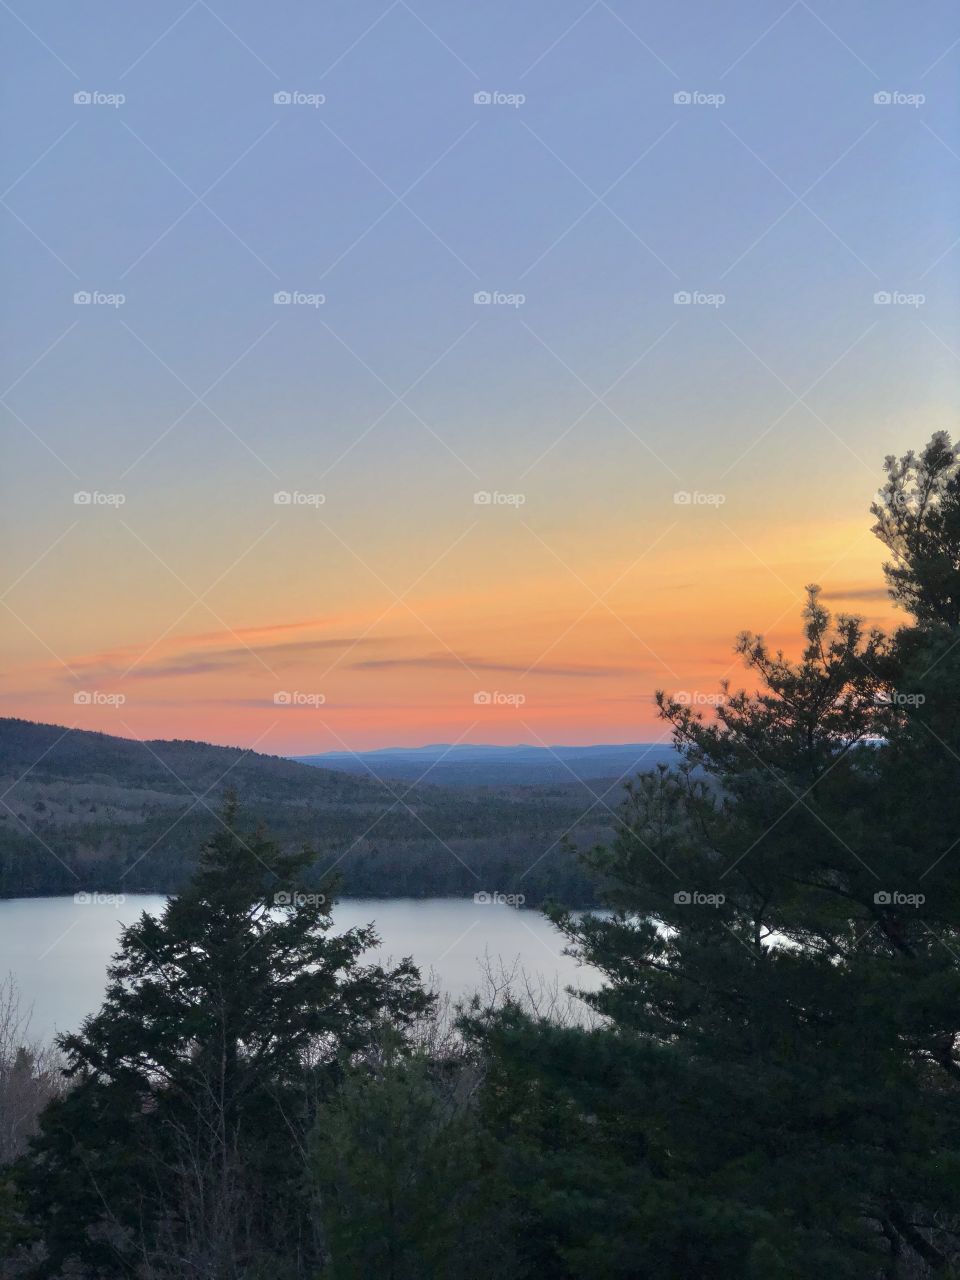 Colorful sunset over mountains and Eagle Lake in Acadia National Park in Bar Harbor, Maine USA, during Spring season.